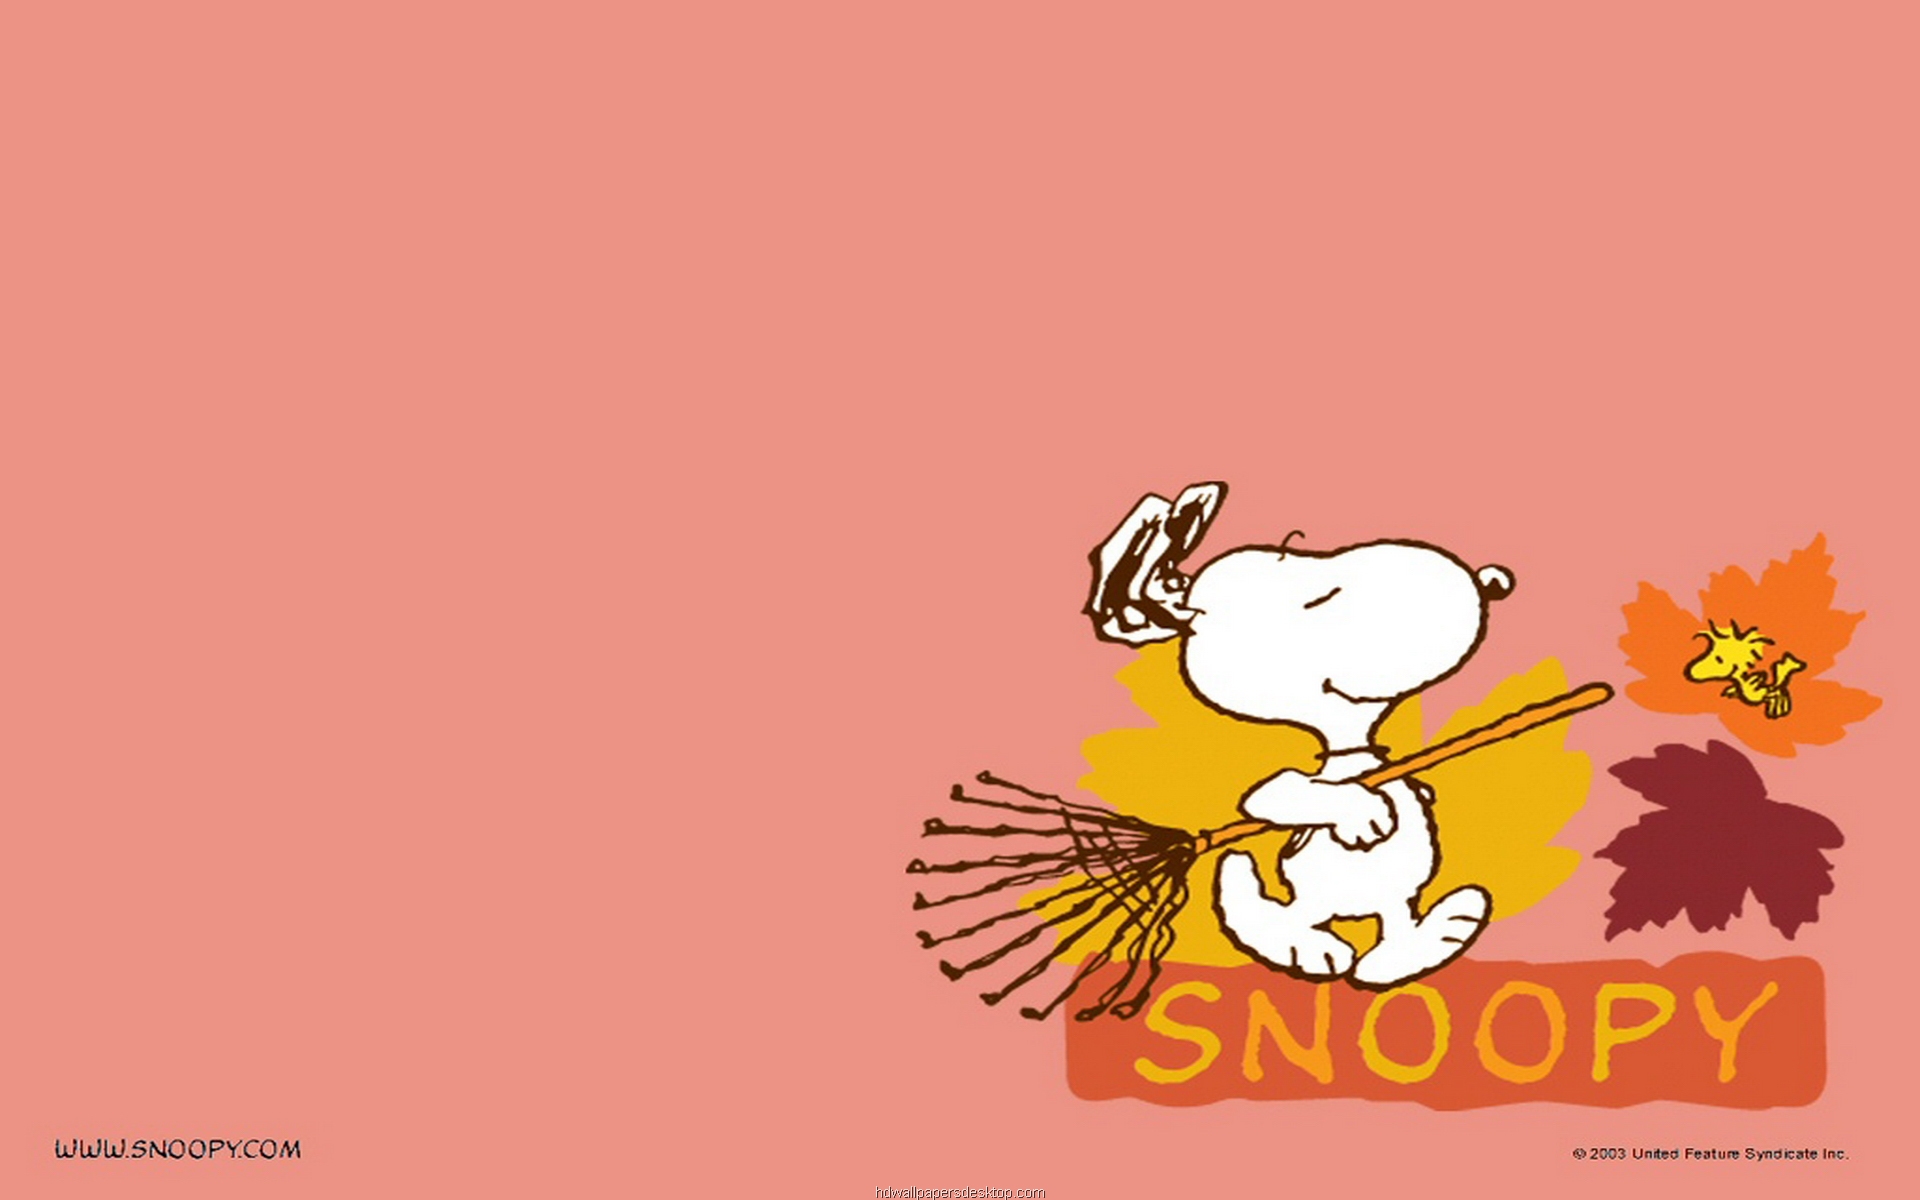 Related Wallpaper From Snoopy